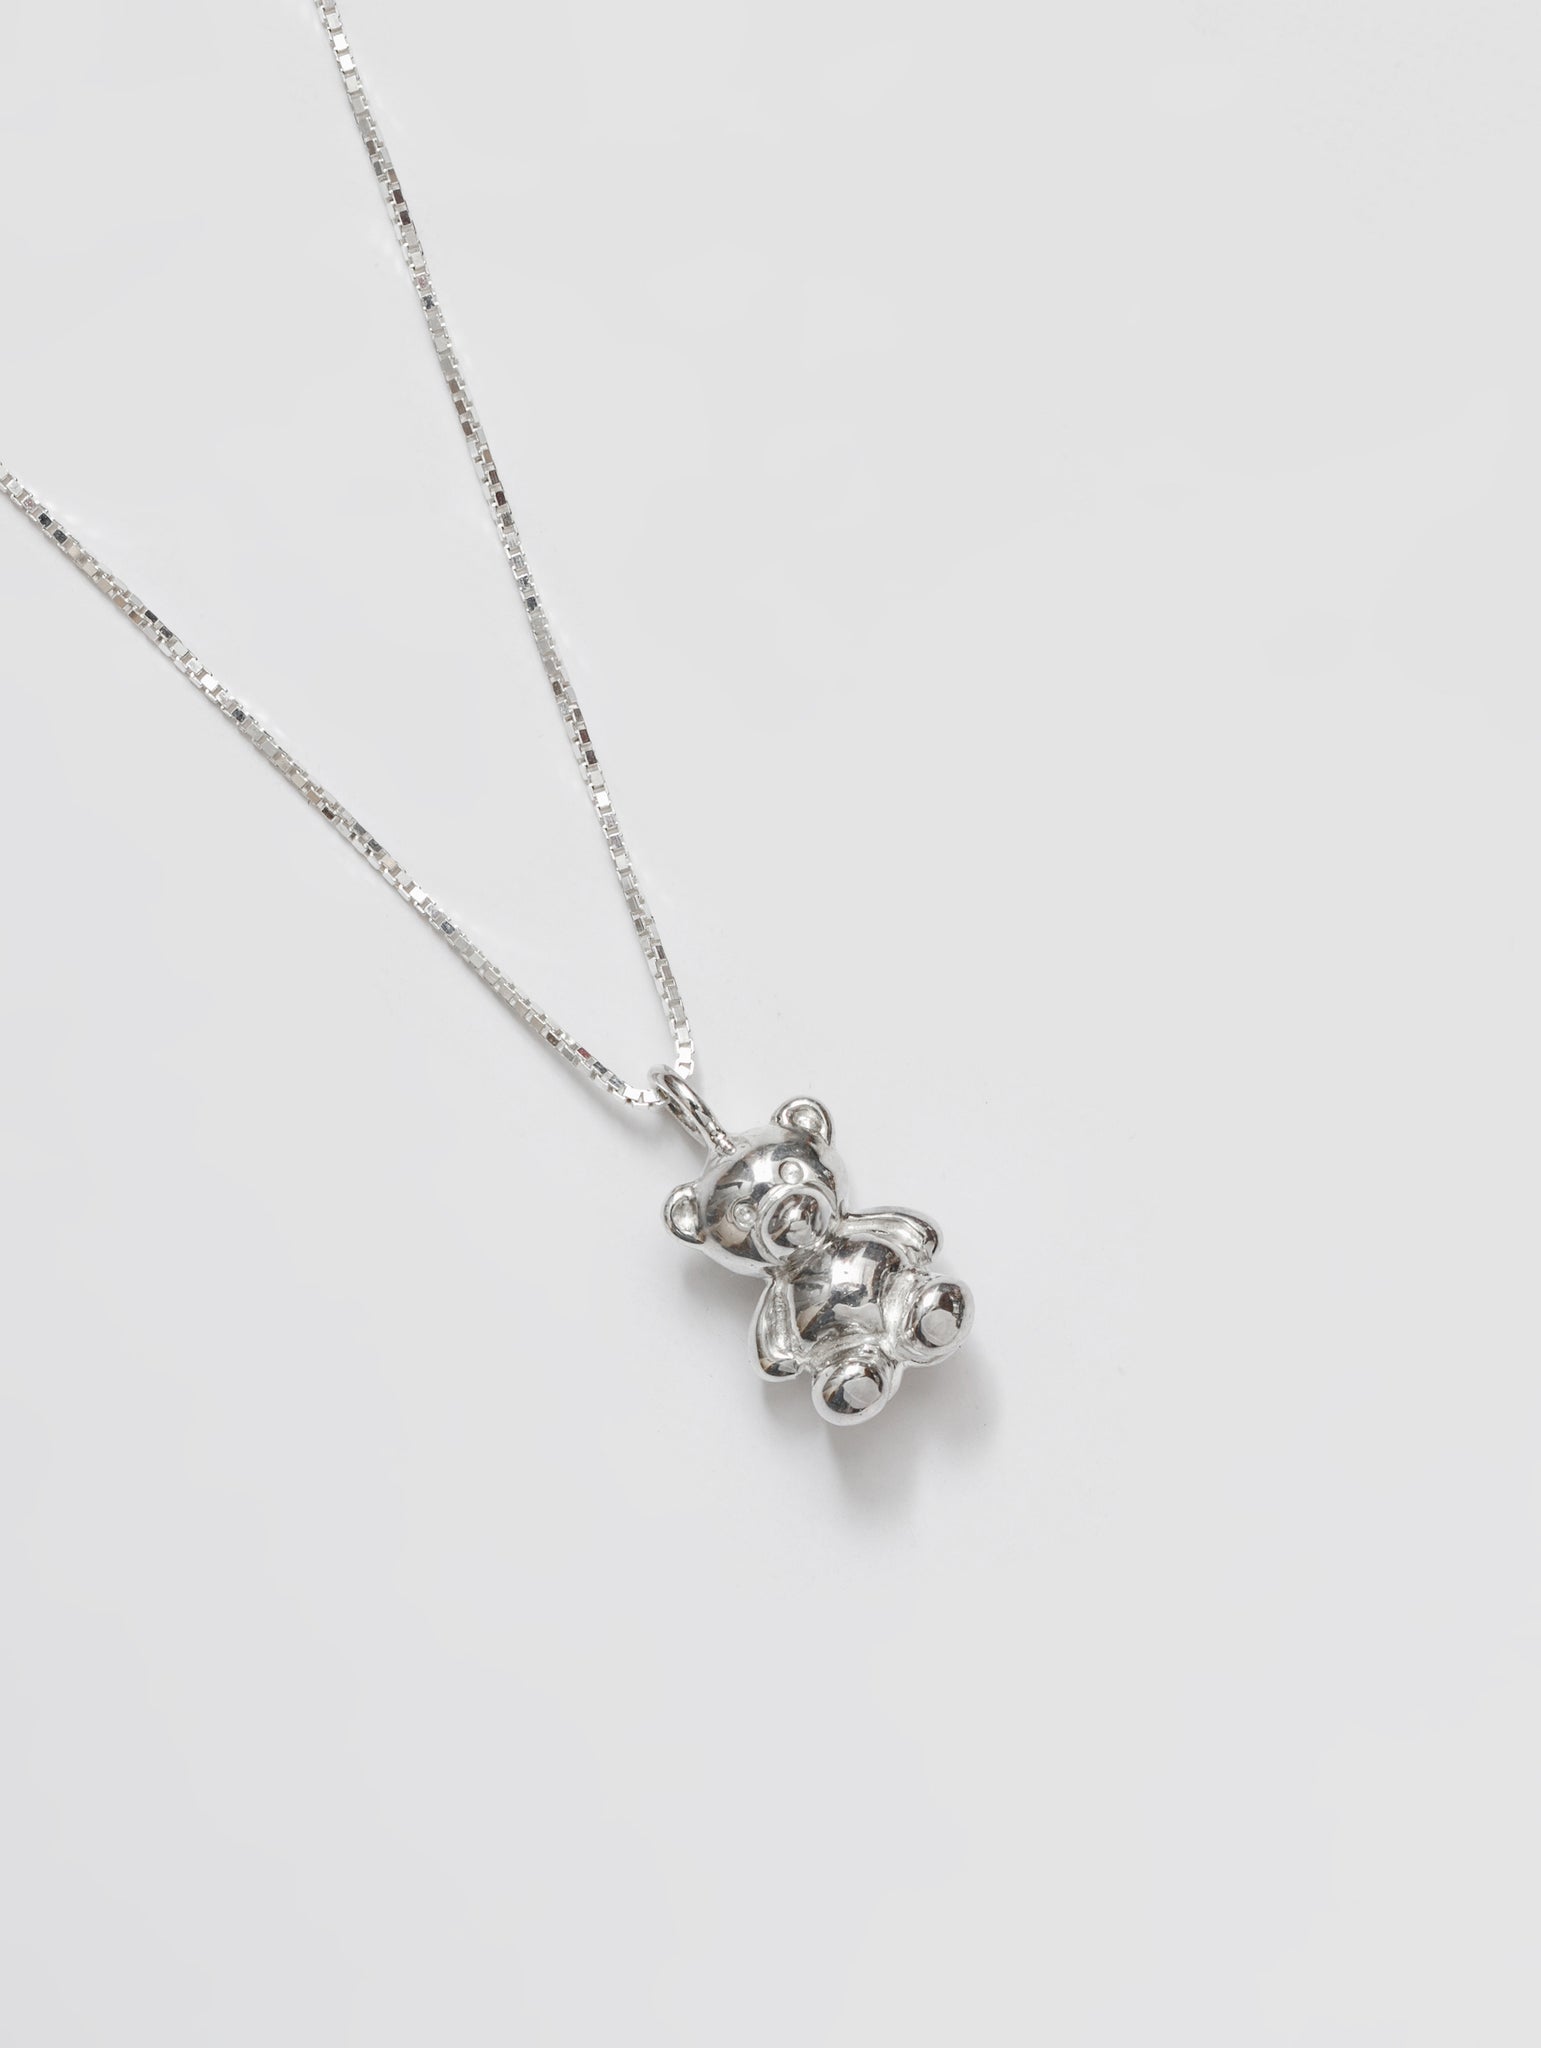 Teddy Bear Charm Necklace in Sterling Silver